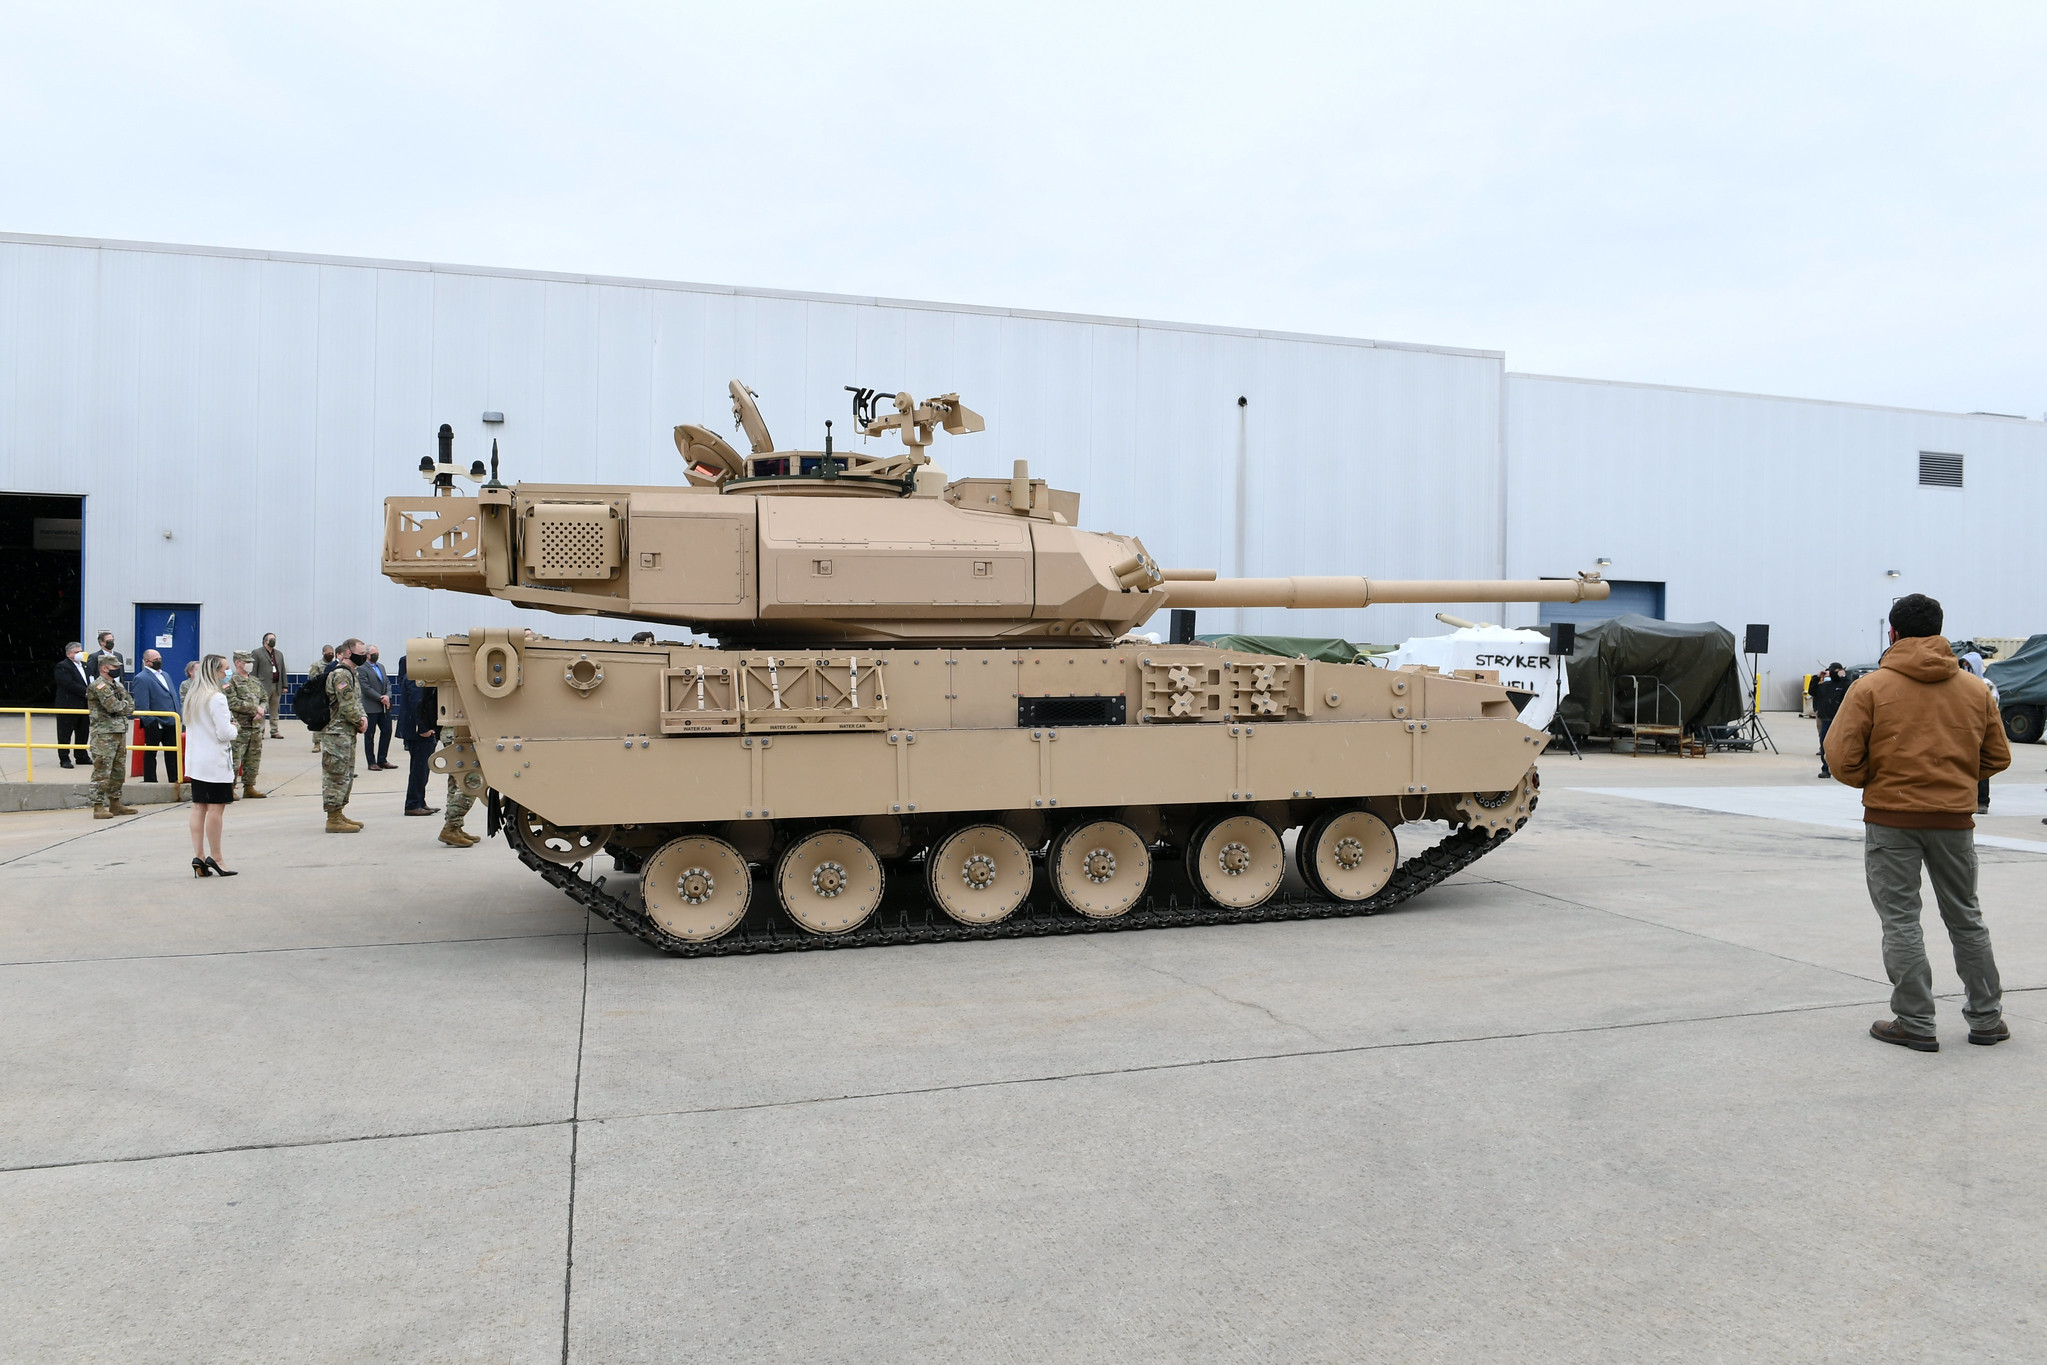 U.S. Army GDLS M10 Booker armored fighting vehicle. (Photo by General Dynamics Land Systems)